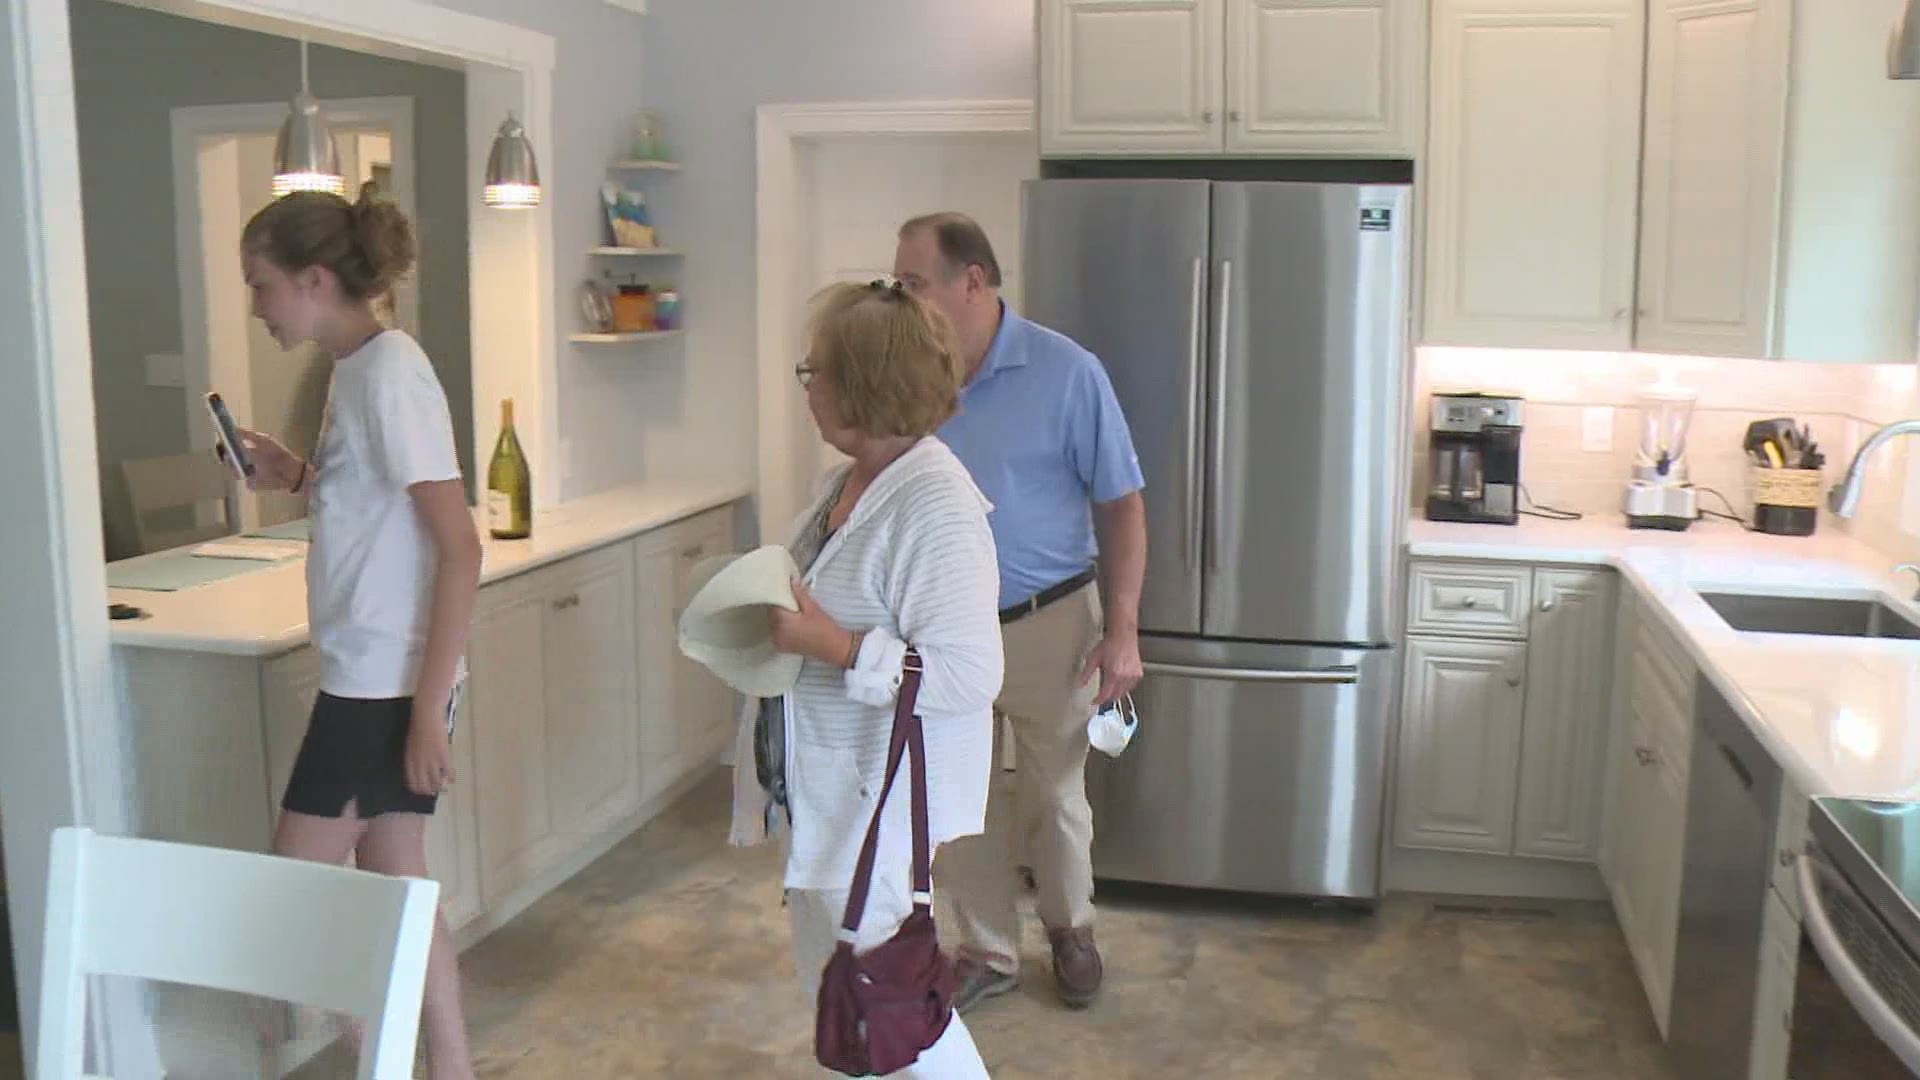 A woman's daughter helped renovate a home.